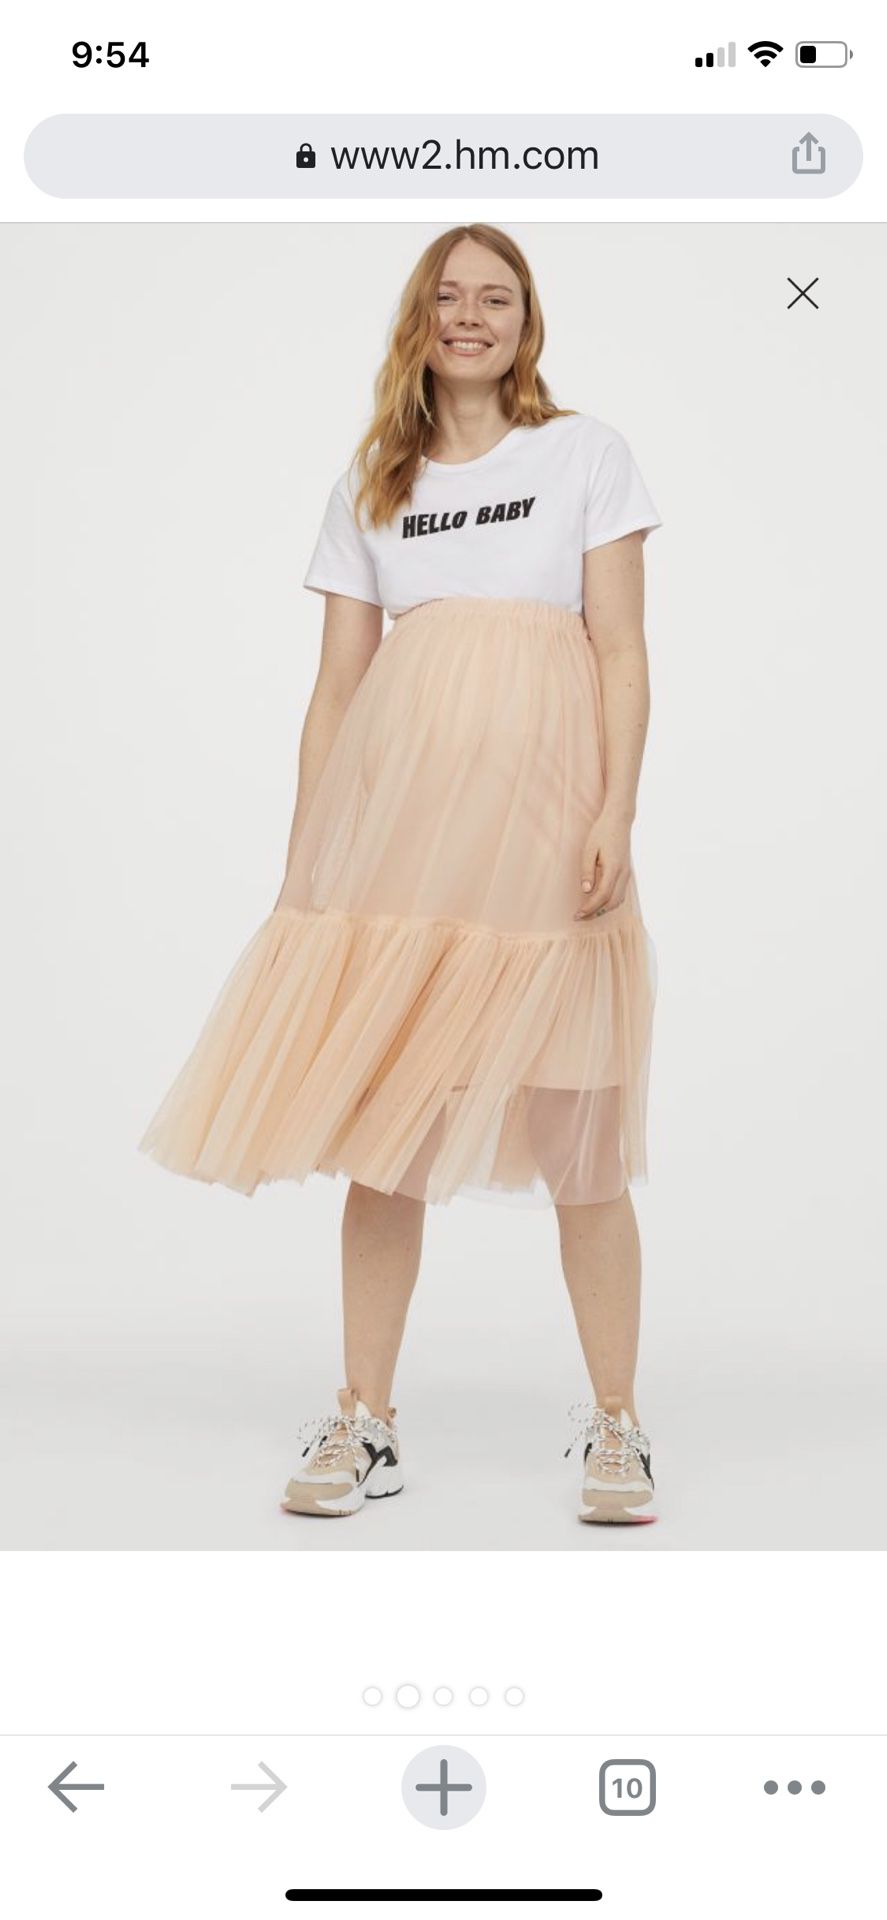 Brand new MAMA tulle skirt from HM maternity wear